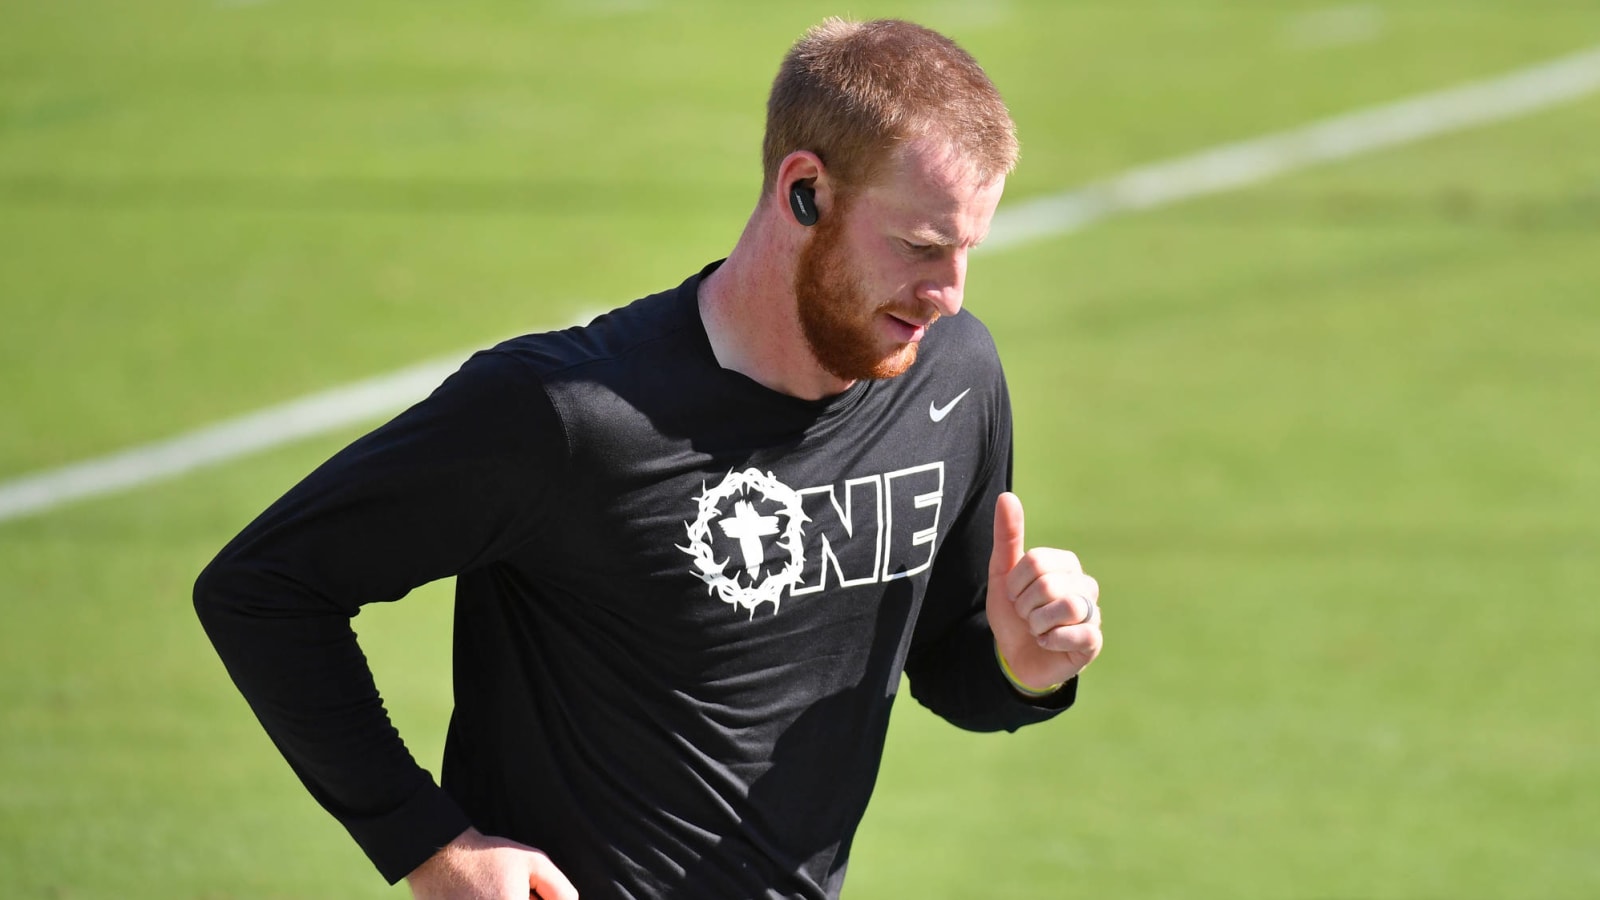 Colts teammates praise Carson Wentz: 'Going to be special'